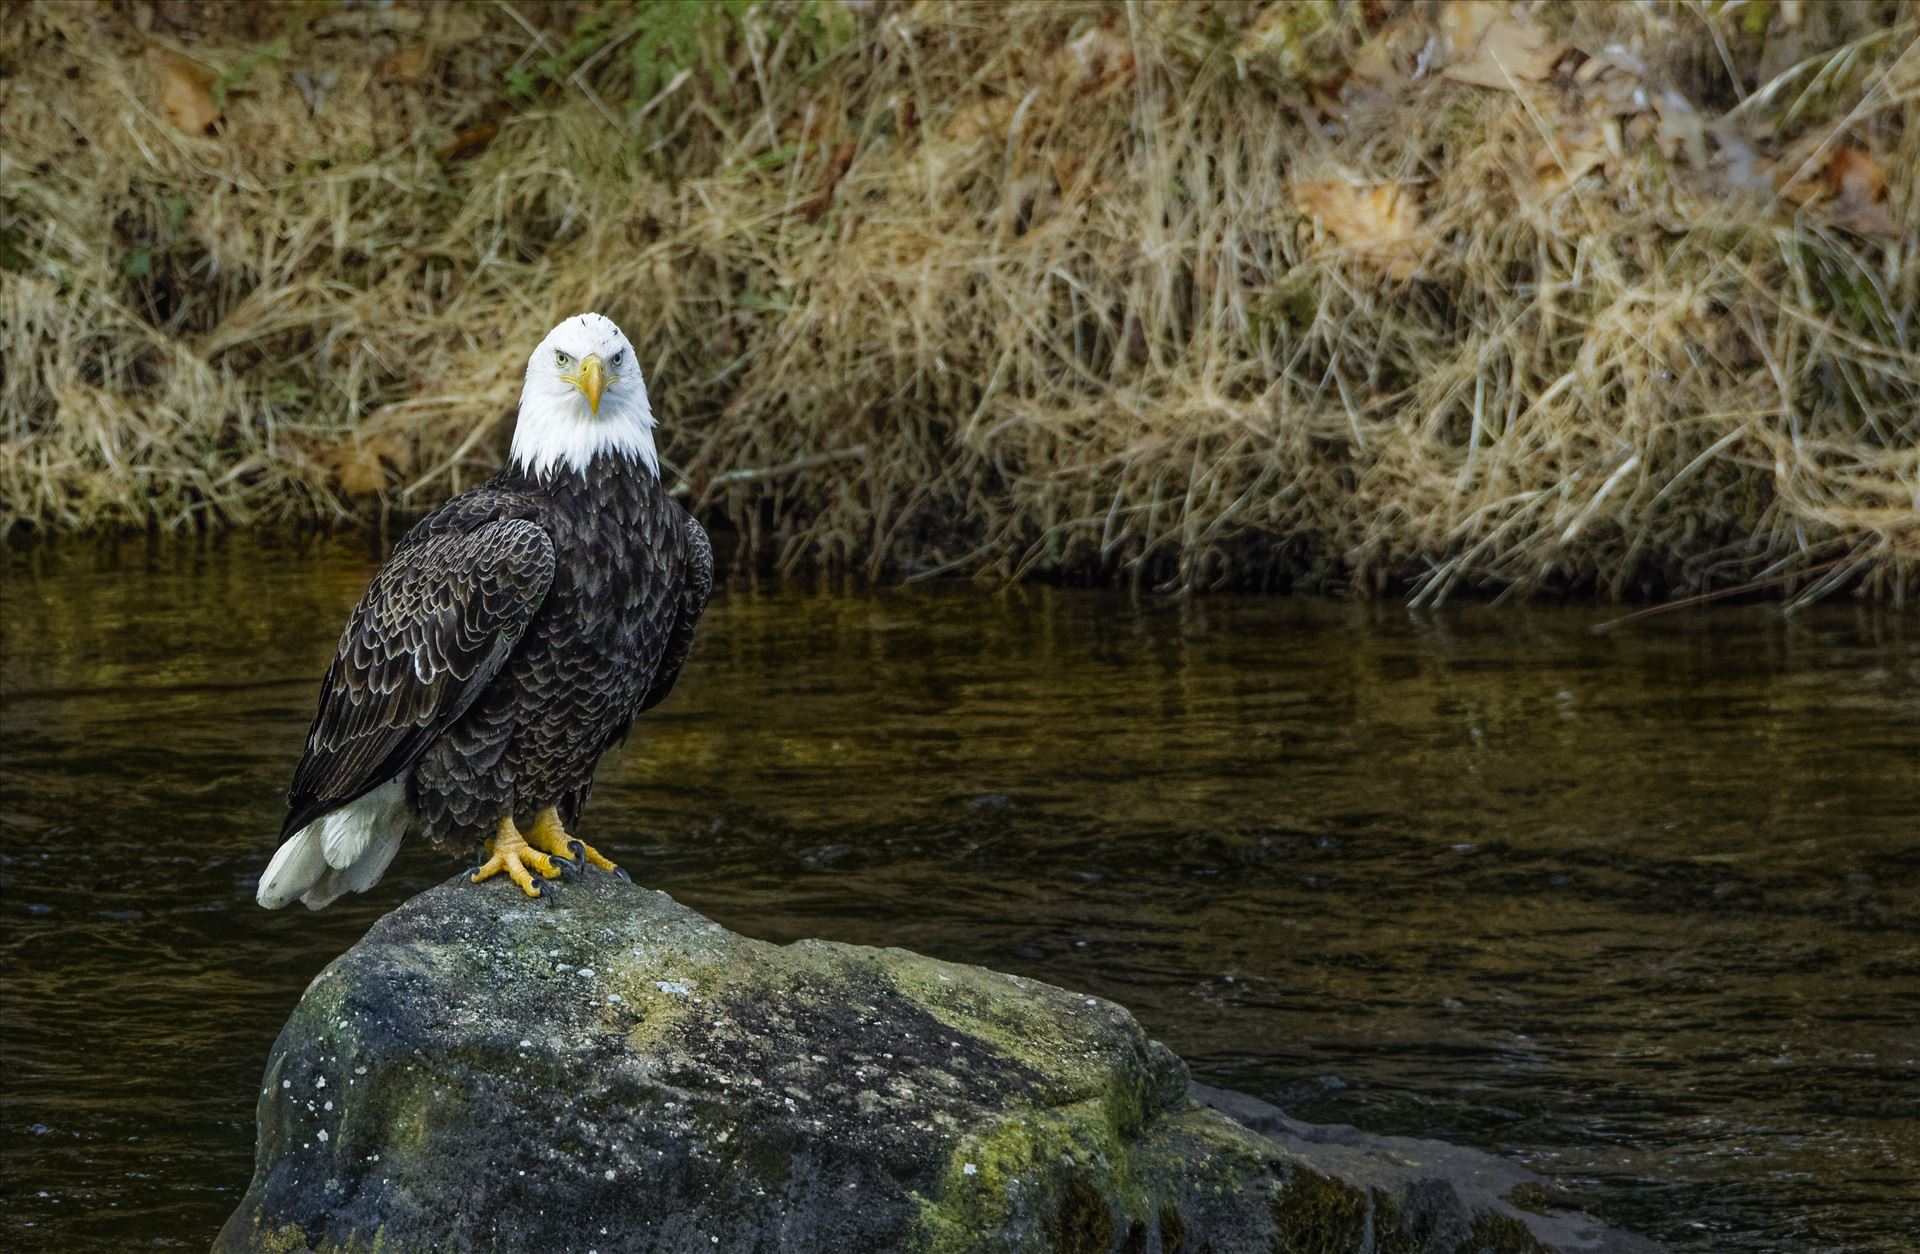 Bald Eagle on the Rocks - Bald Eagle on the Rocks by Buckmaster